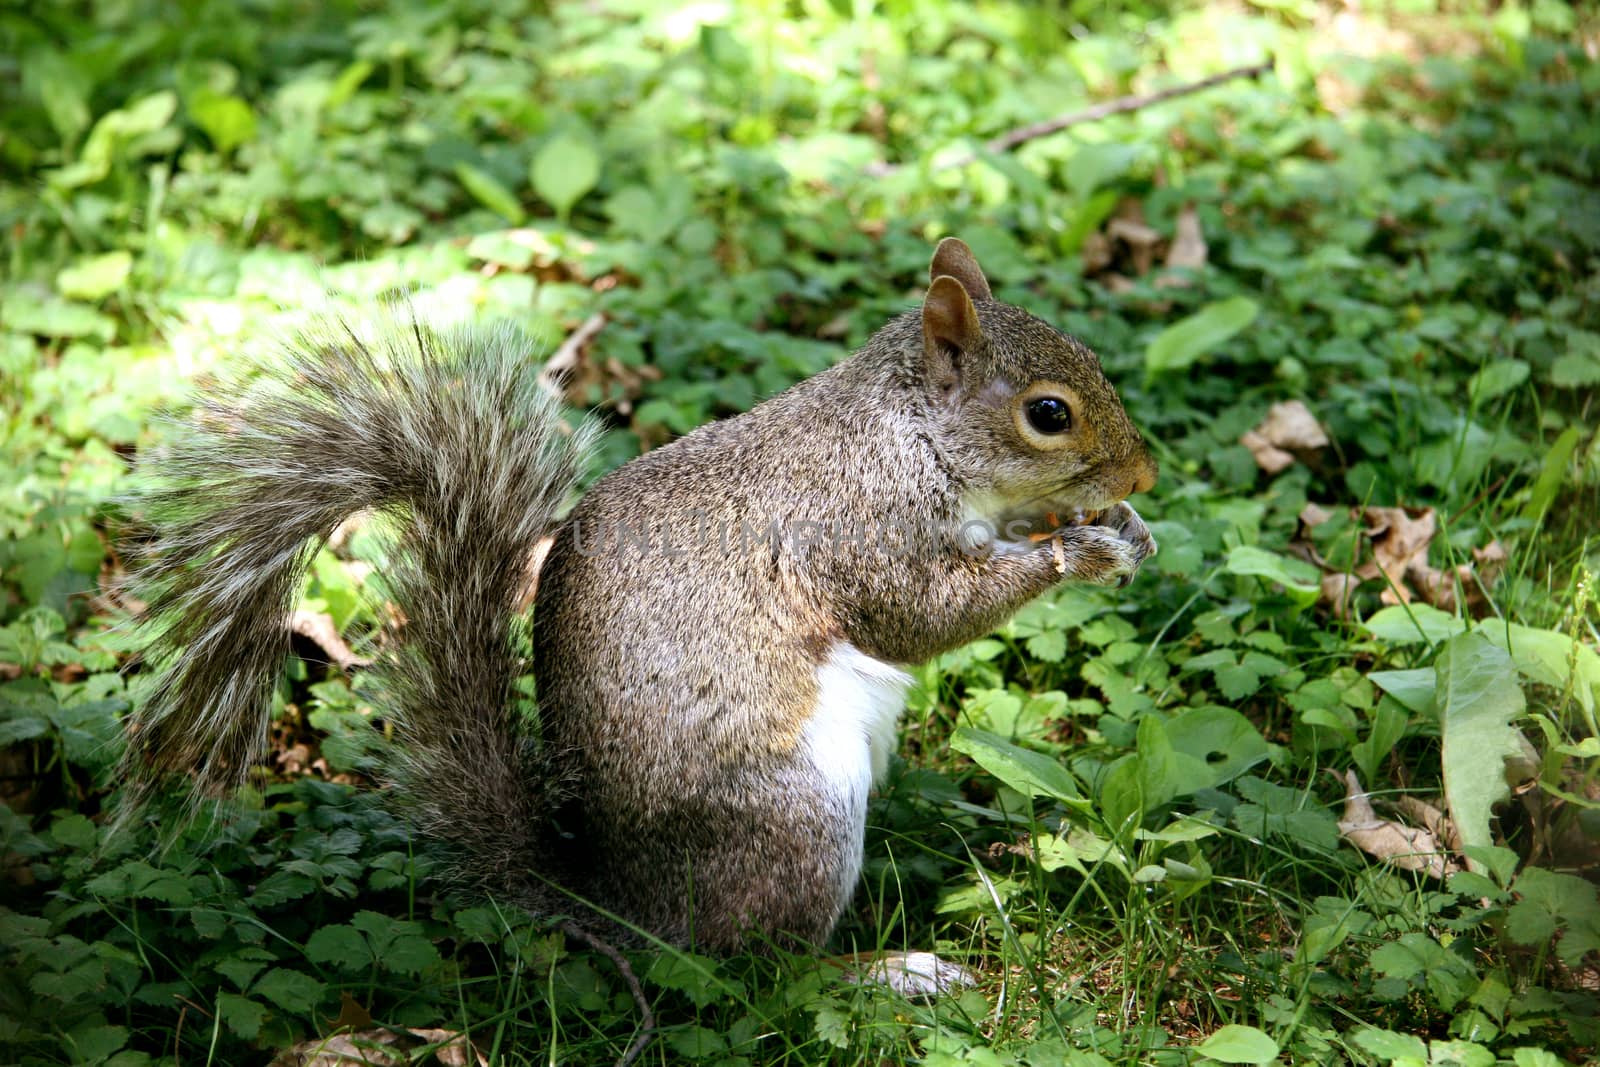 The American grey squirrel eating nut